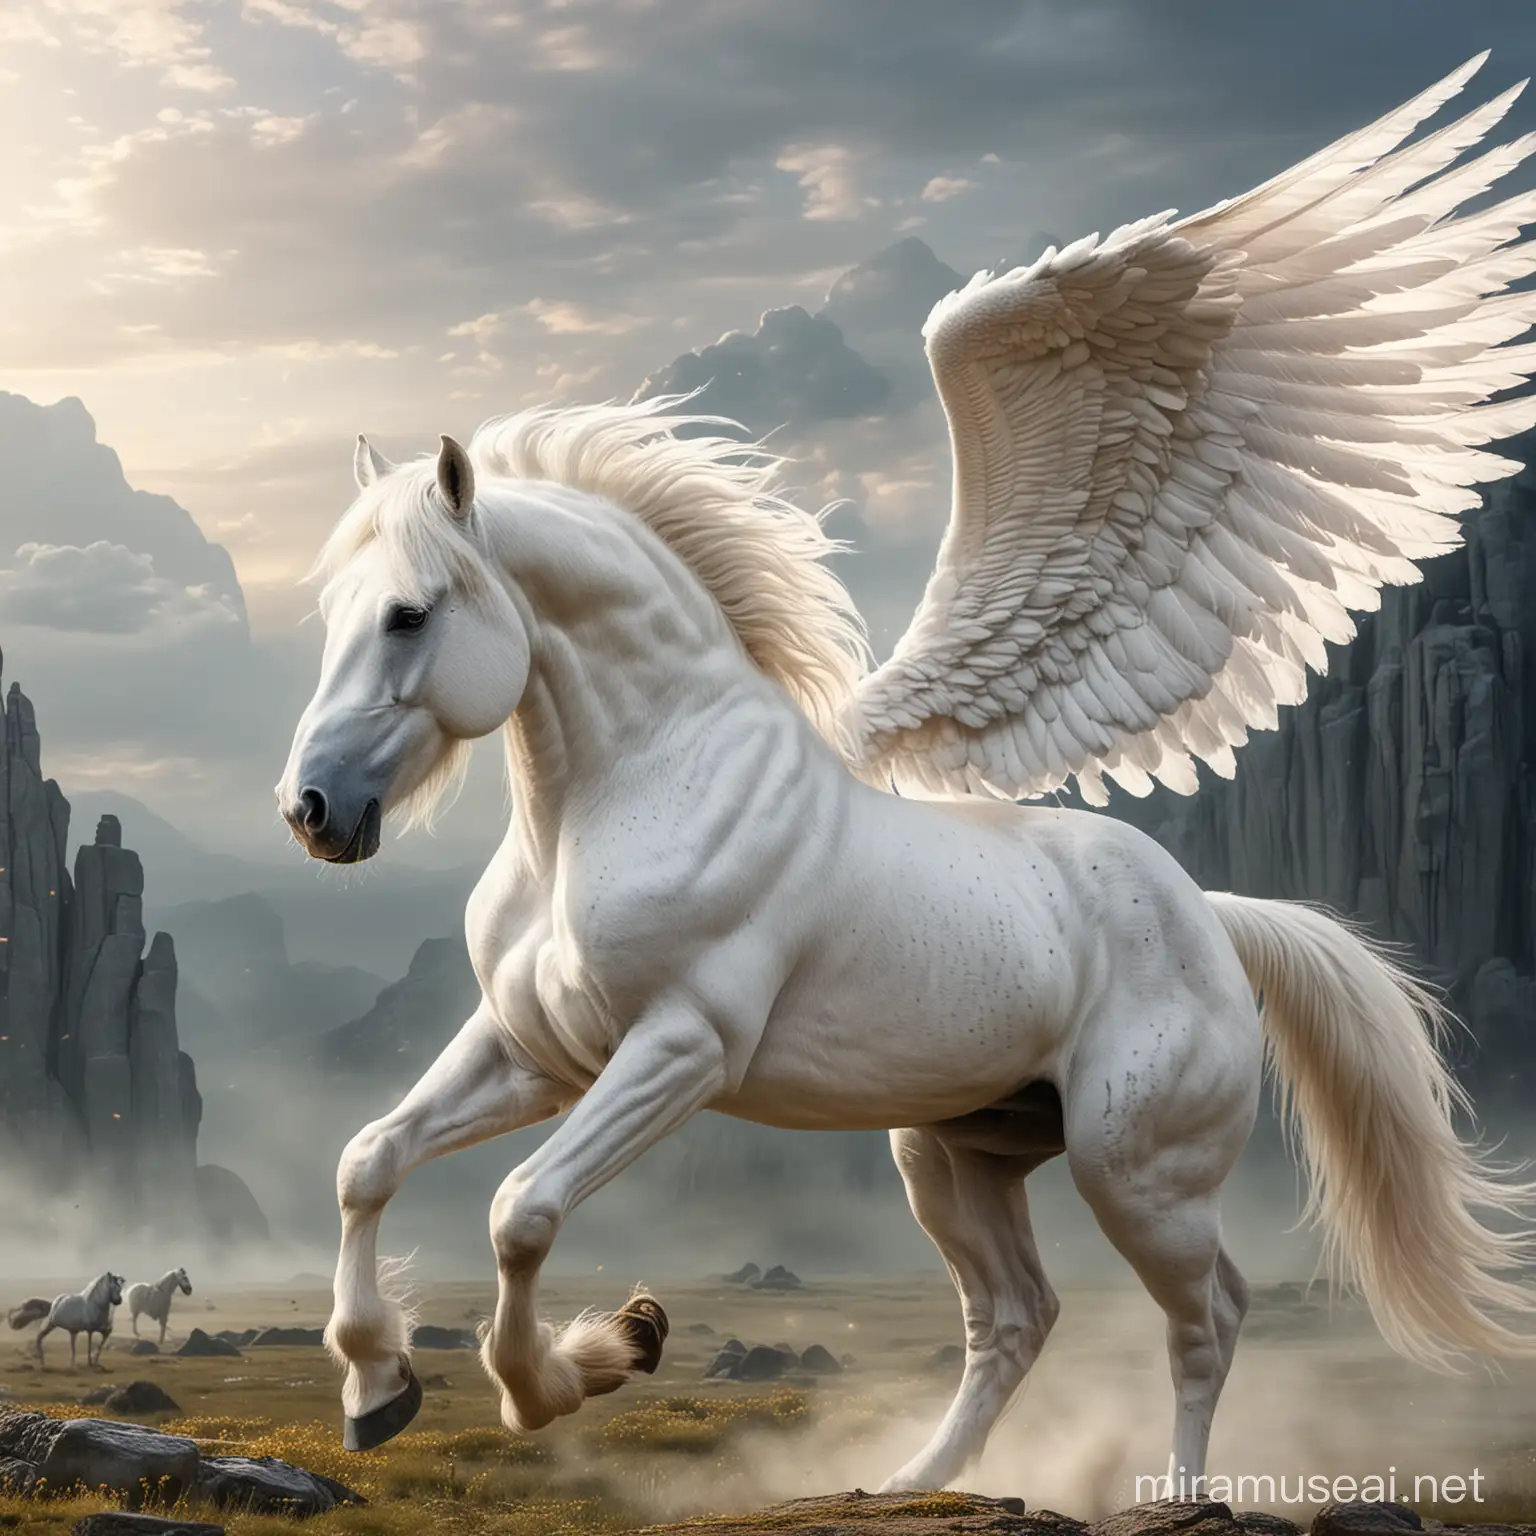 Majestic Winged White Horse Soaring Through the Enchanted Sky of a Fantasy Kingdom